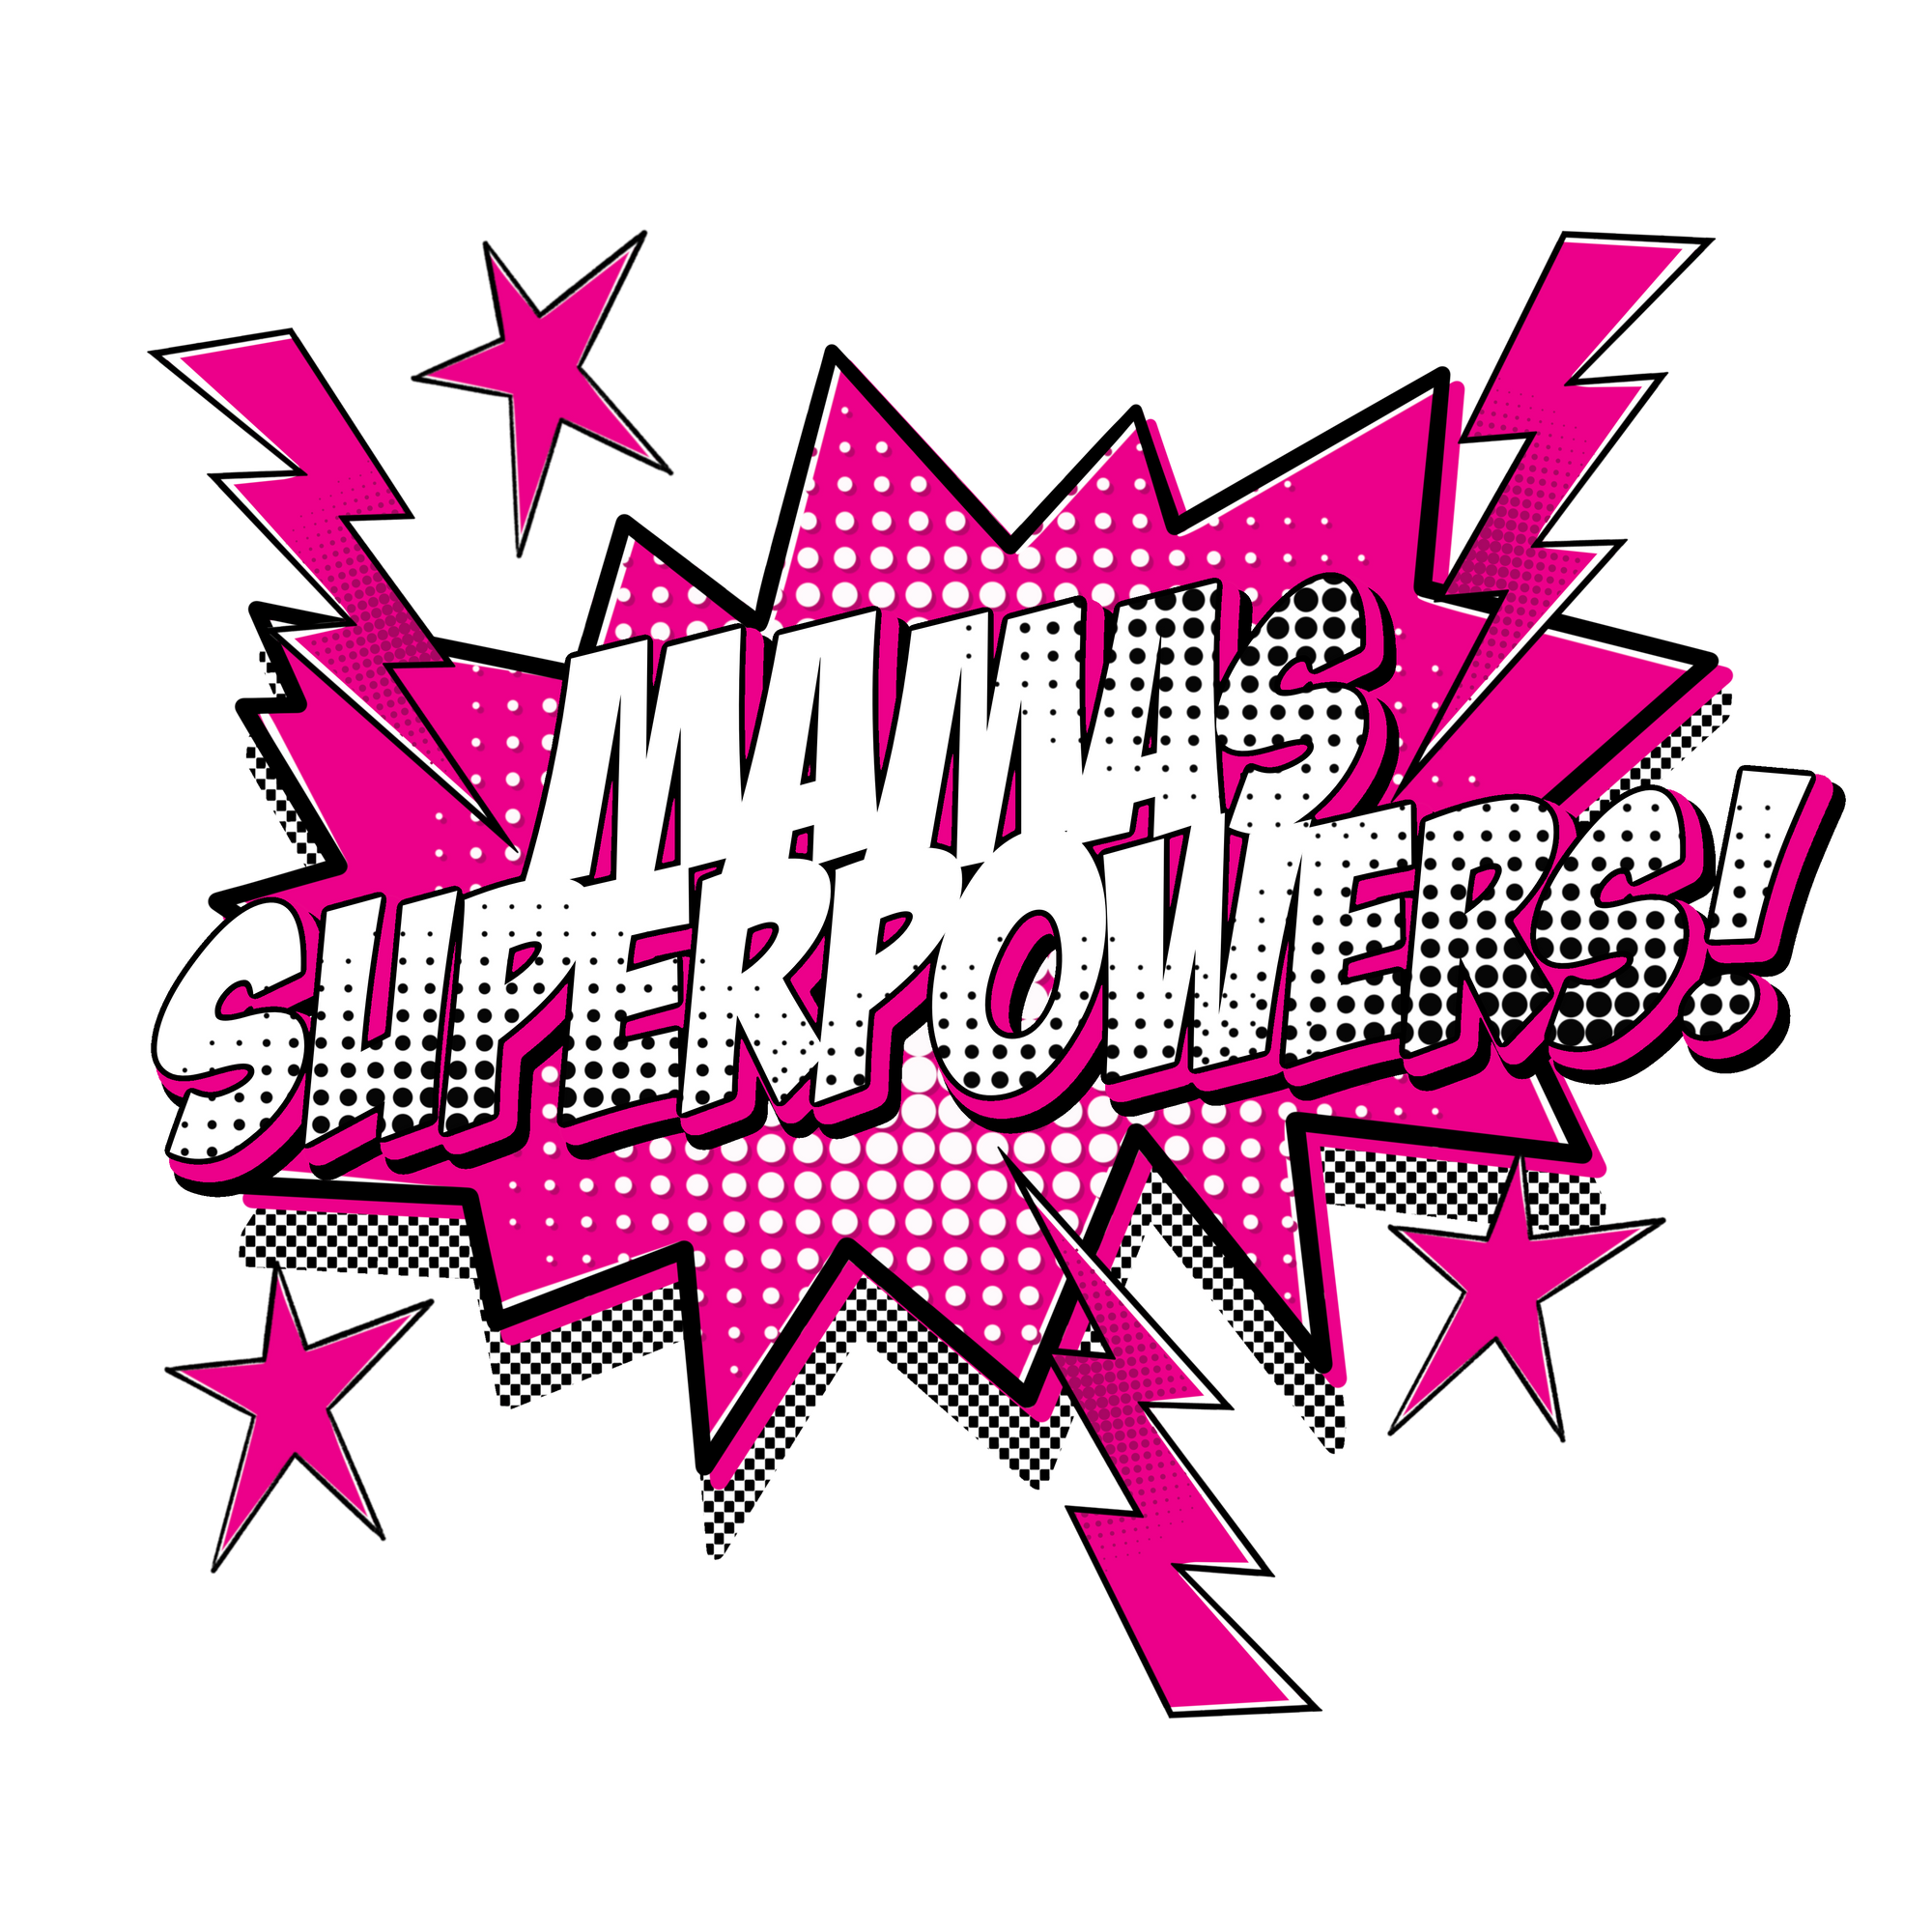 MAMA'S SUPERPOWERS W SLEEVE DTF TRANSFER